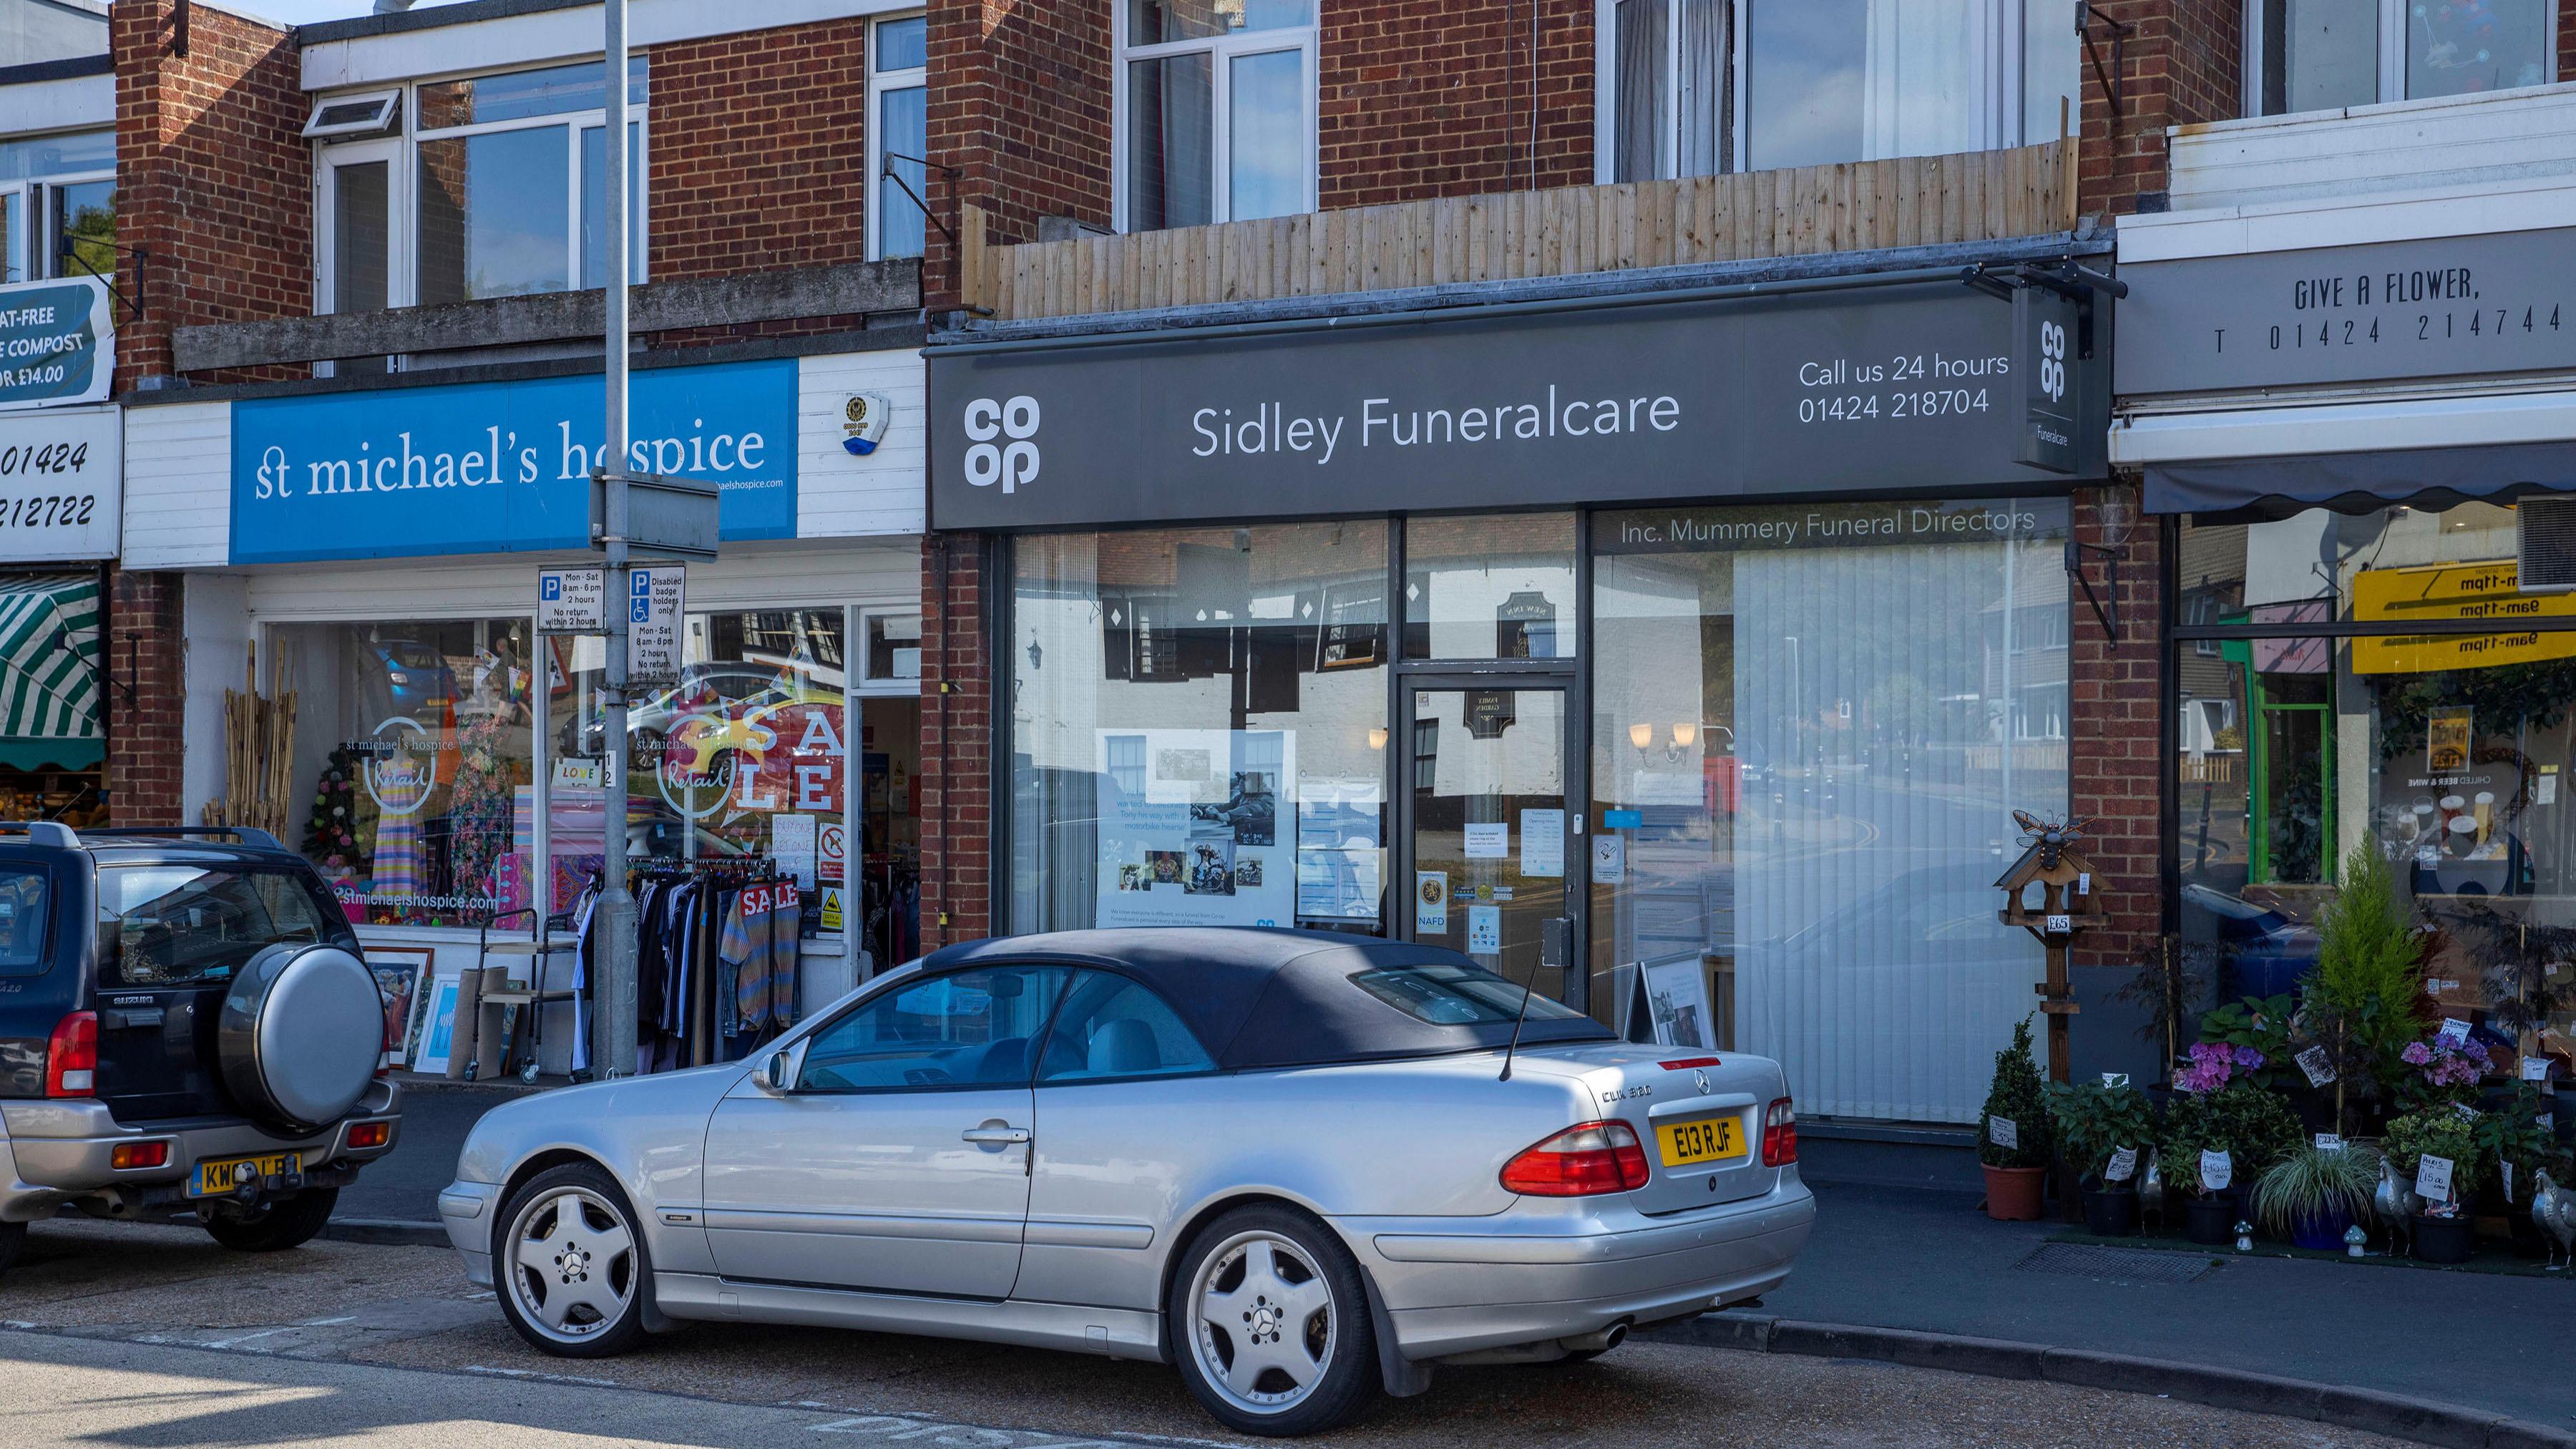 Images Sidley Funeralcare (inc. inc. Mummery Funeral Directors)